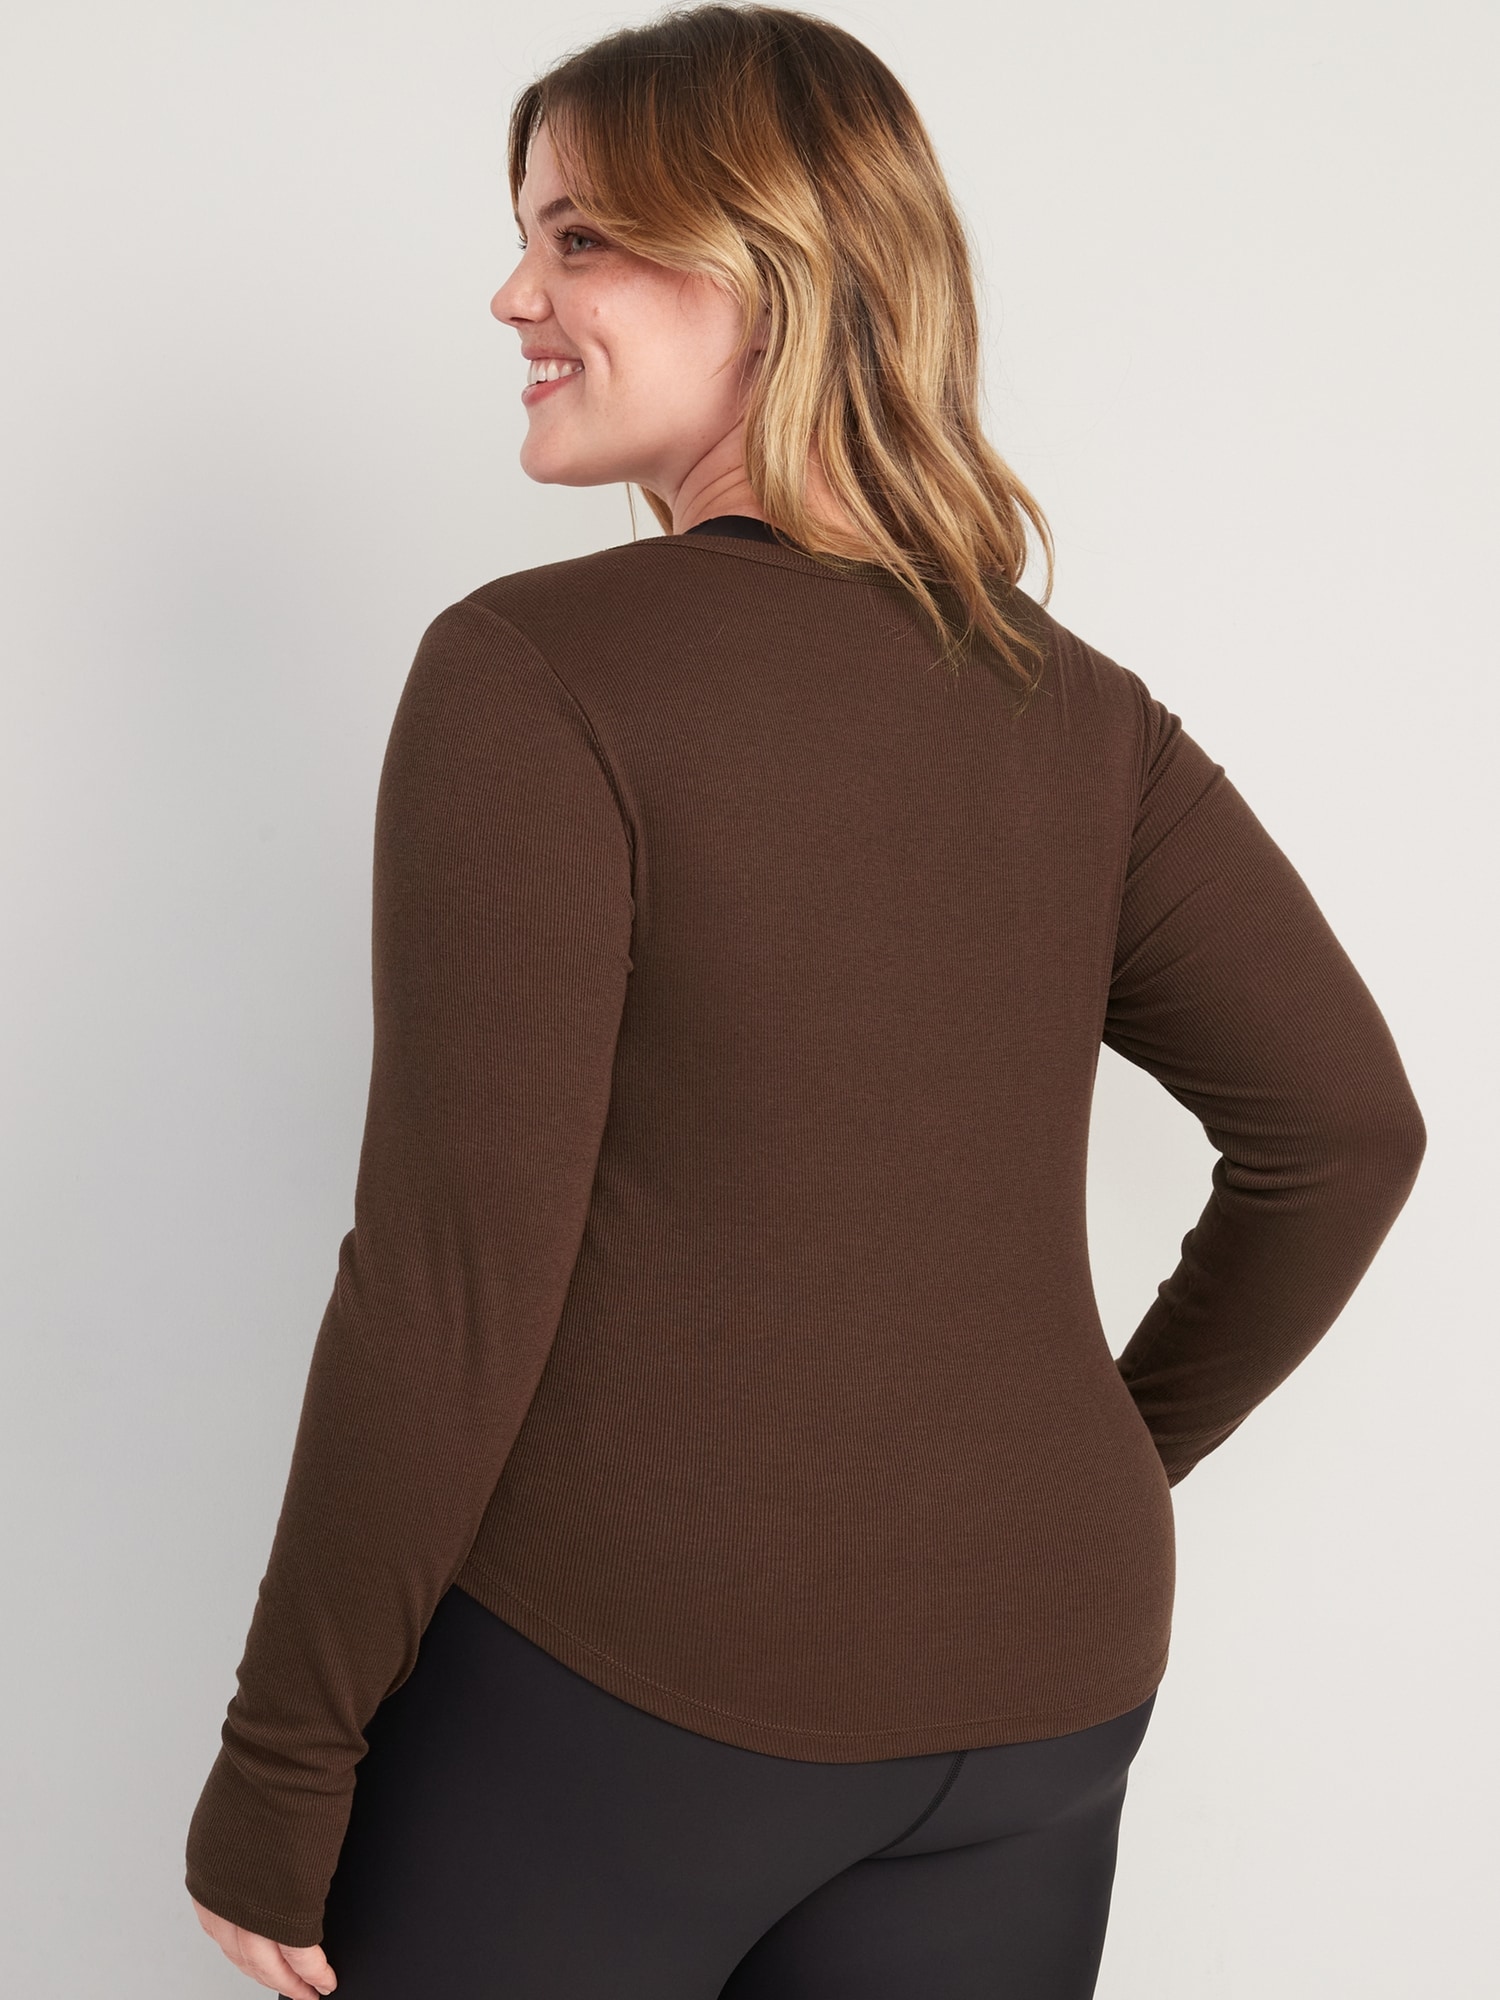 UltraLite Long-Sleeve Rib-Knit Top for Women | Old Navy